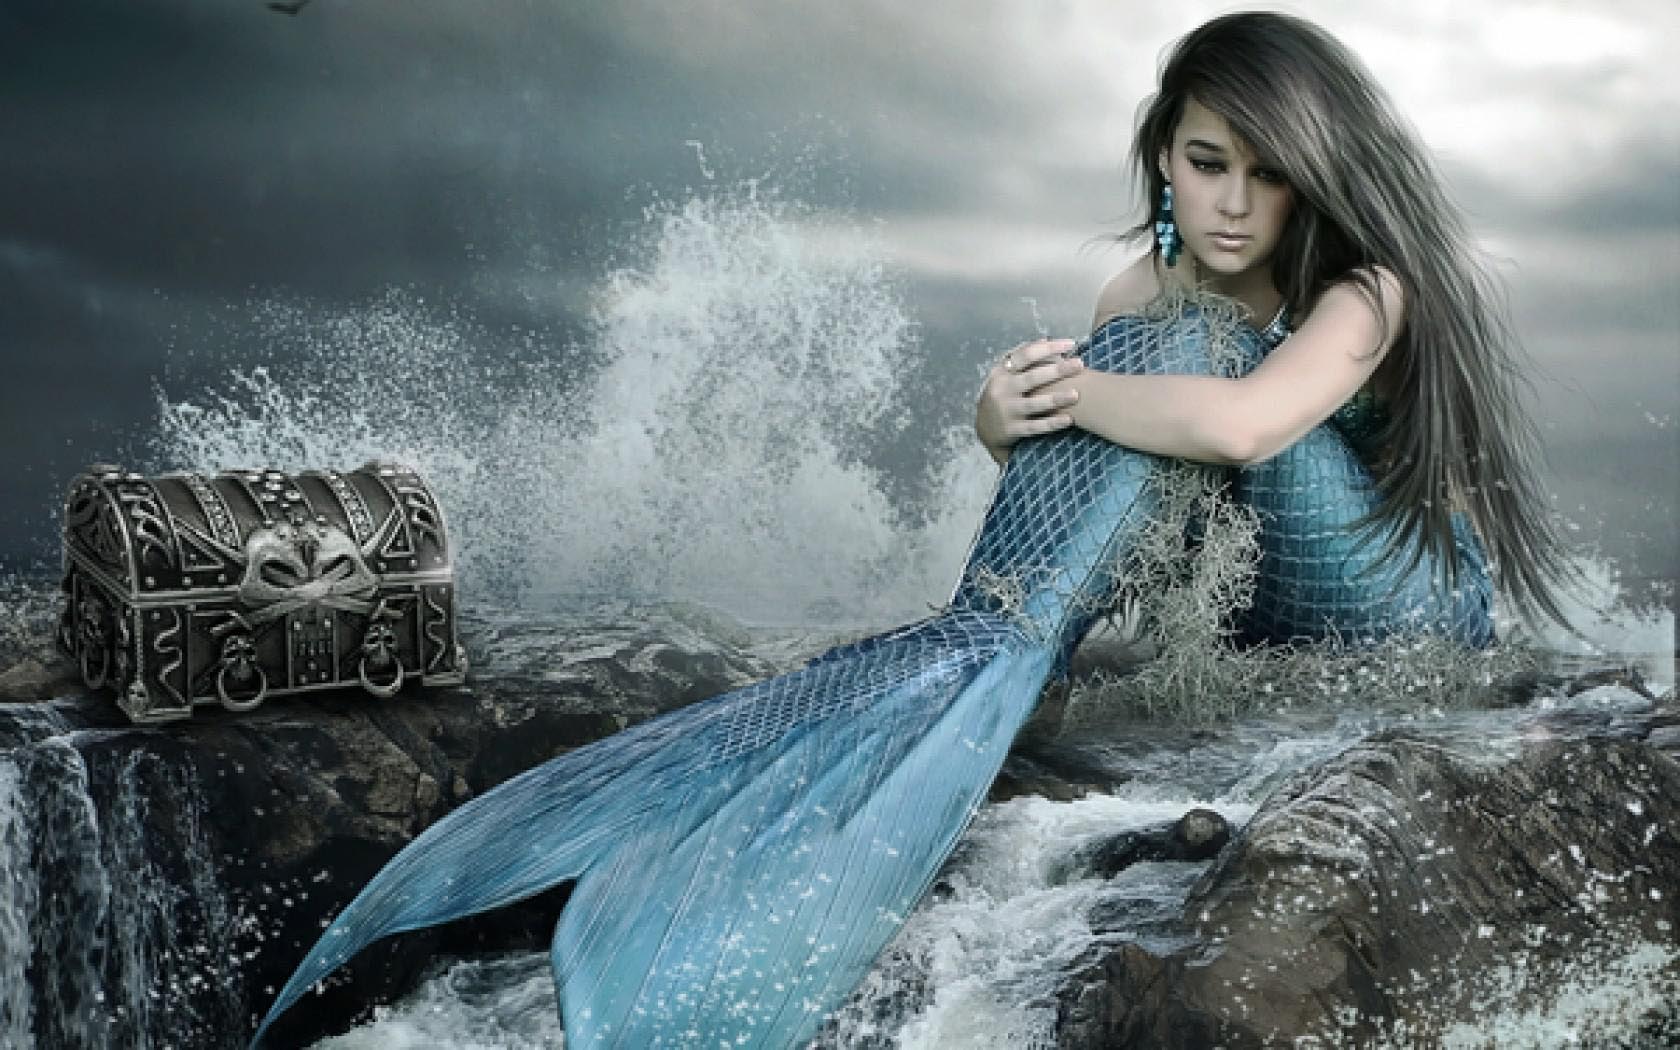 Latest Mermaid HD New Wallpapers Free Download New HD Wallpapers